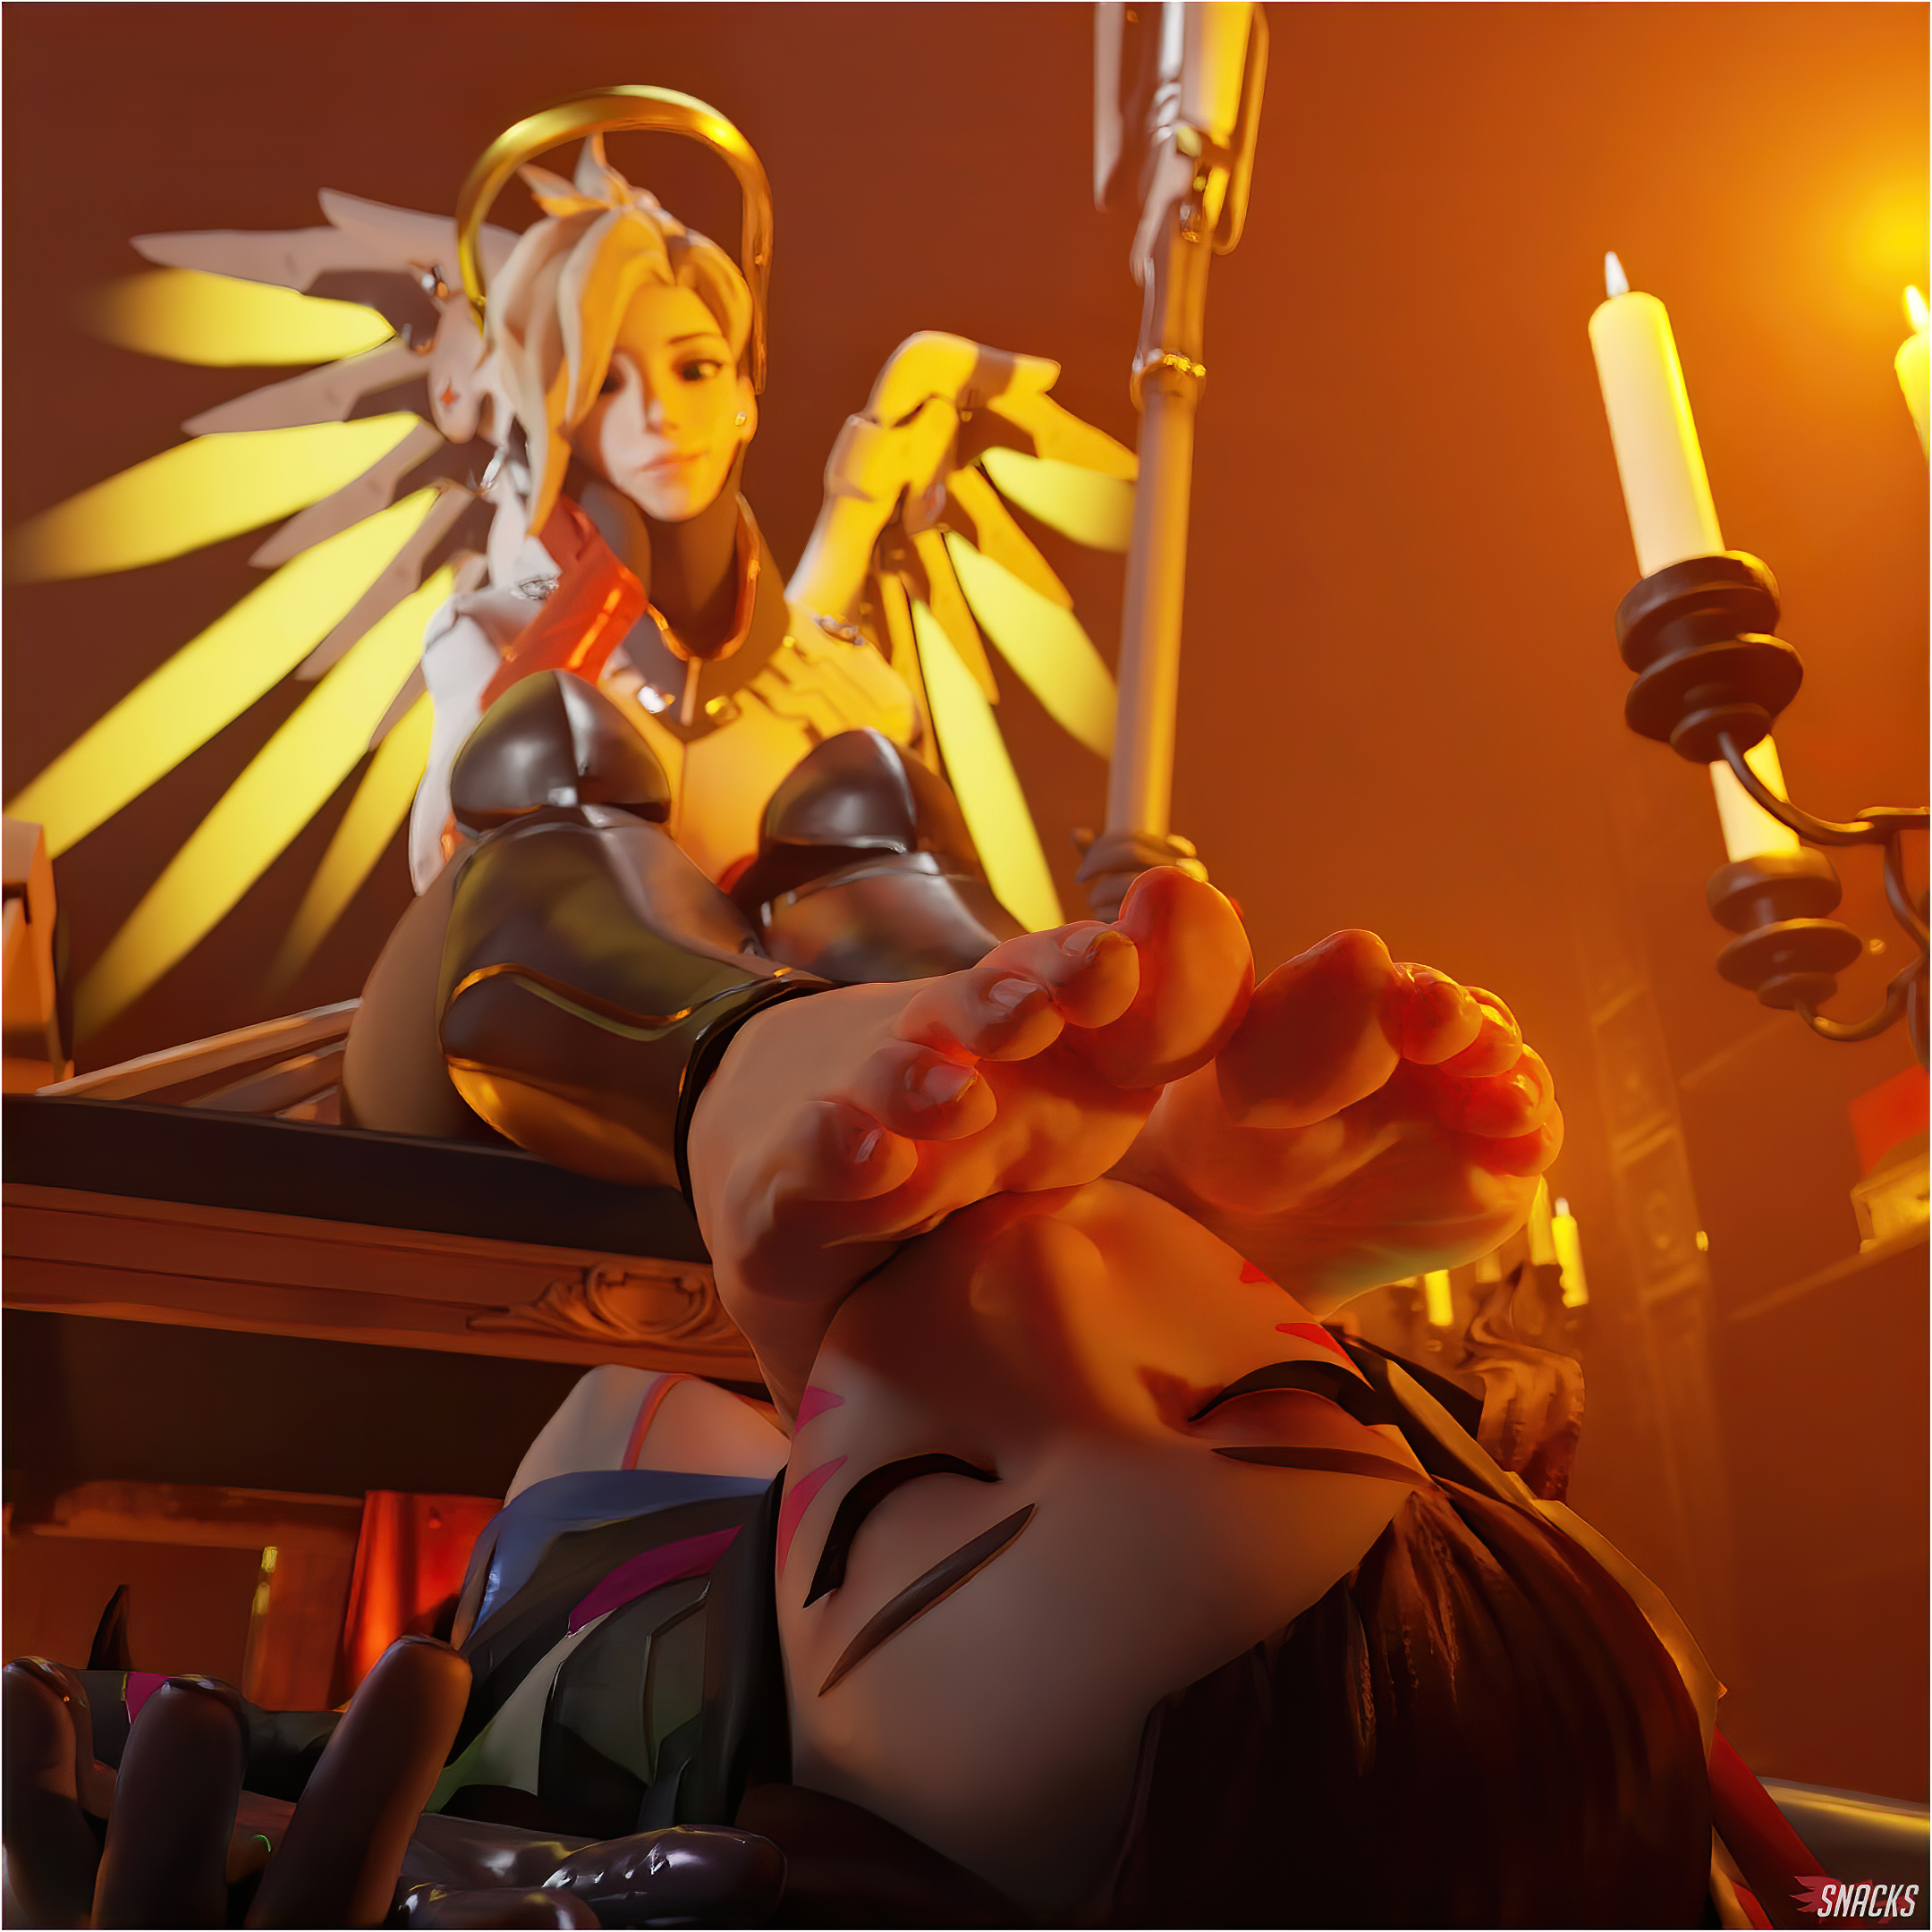 Mercy and D.va - In Private.